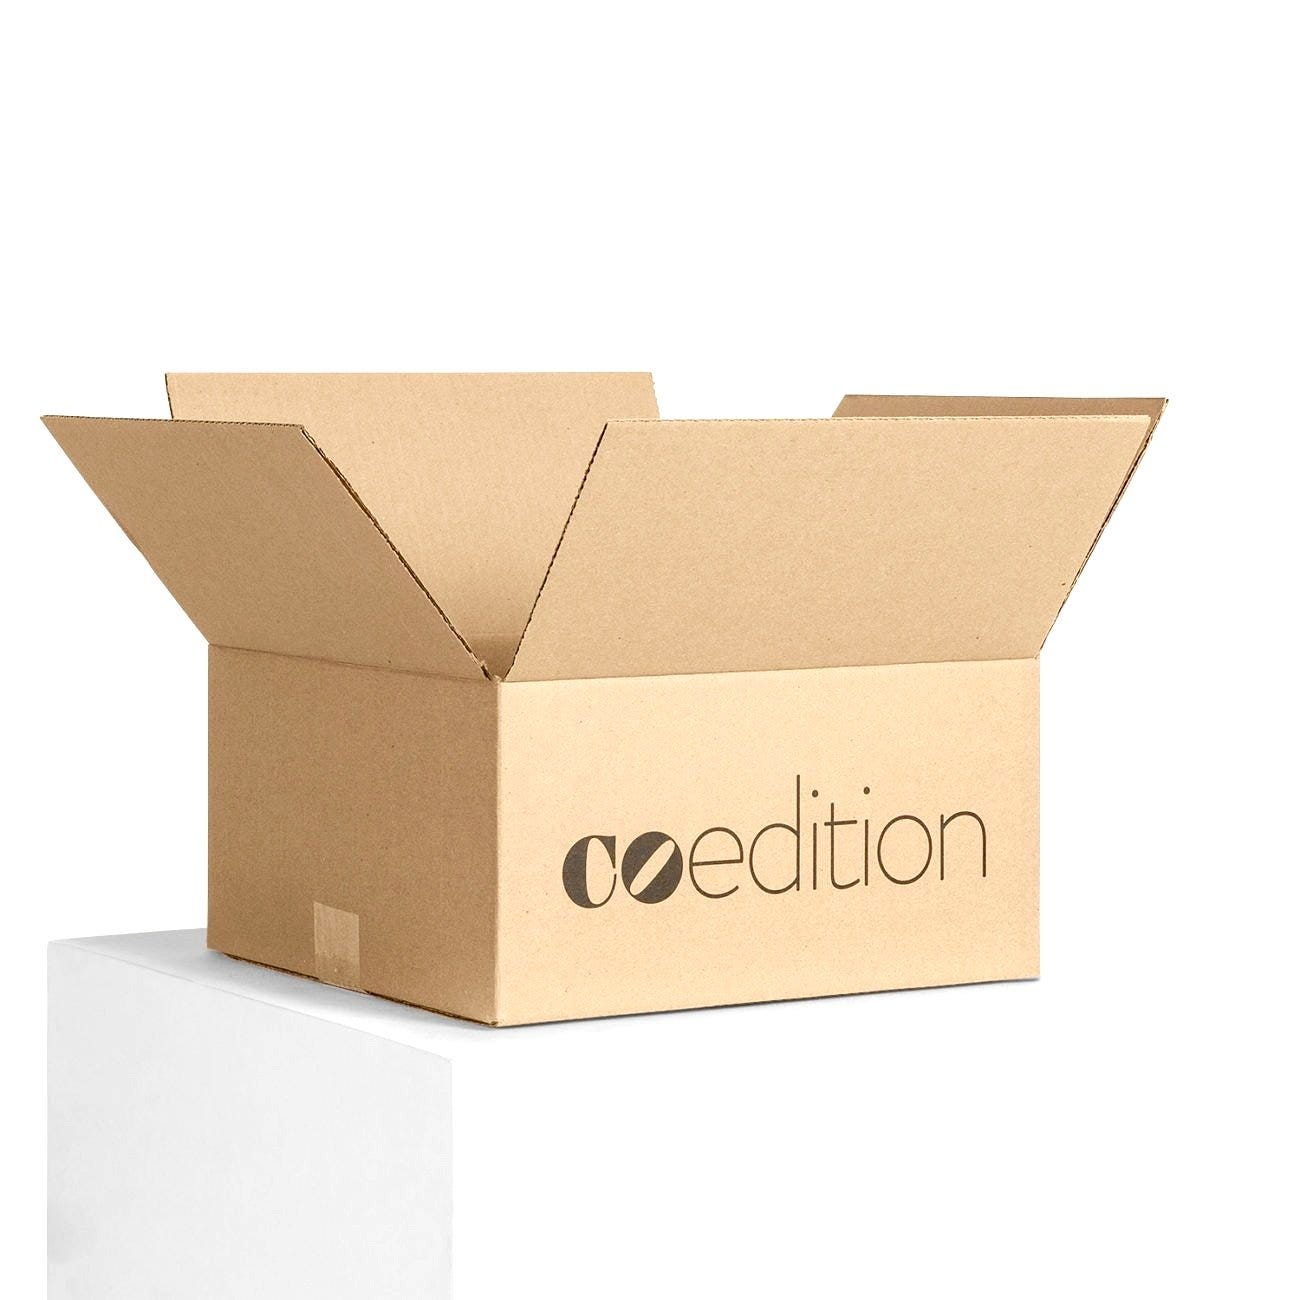 The Art of Ordering Custom Mailer Boxes: A Guide to Personalized Packaging, by C2C Packaging